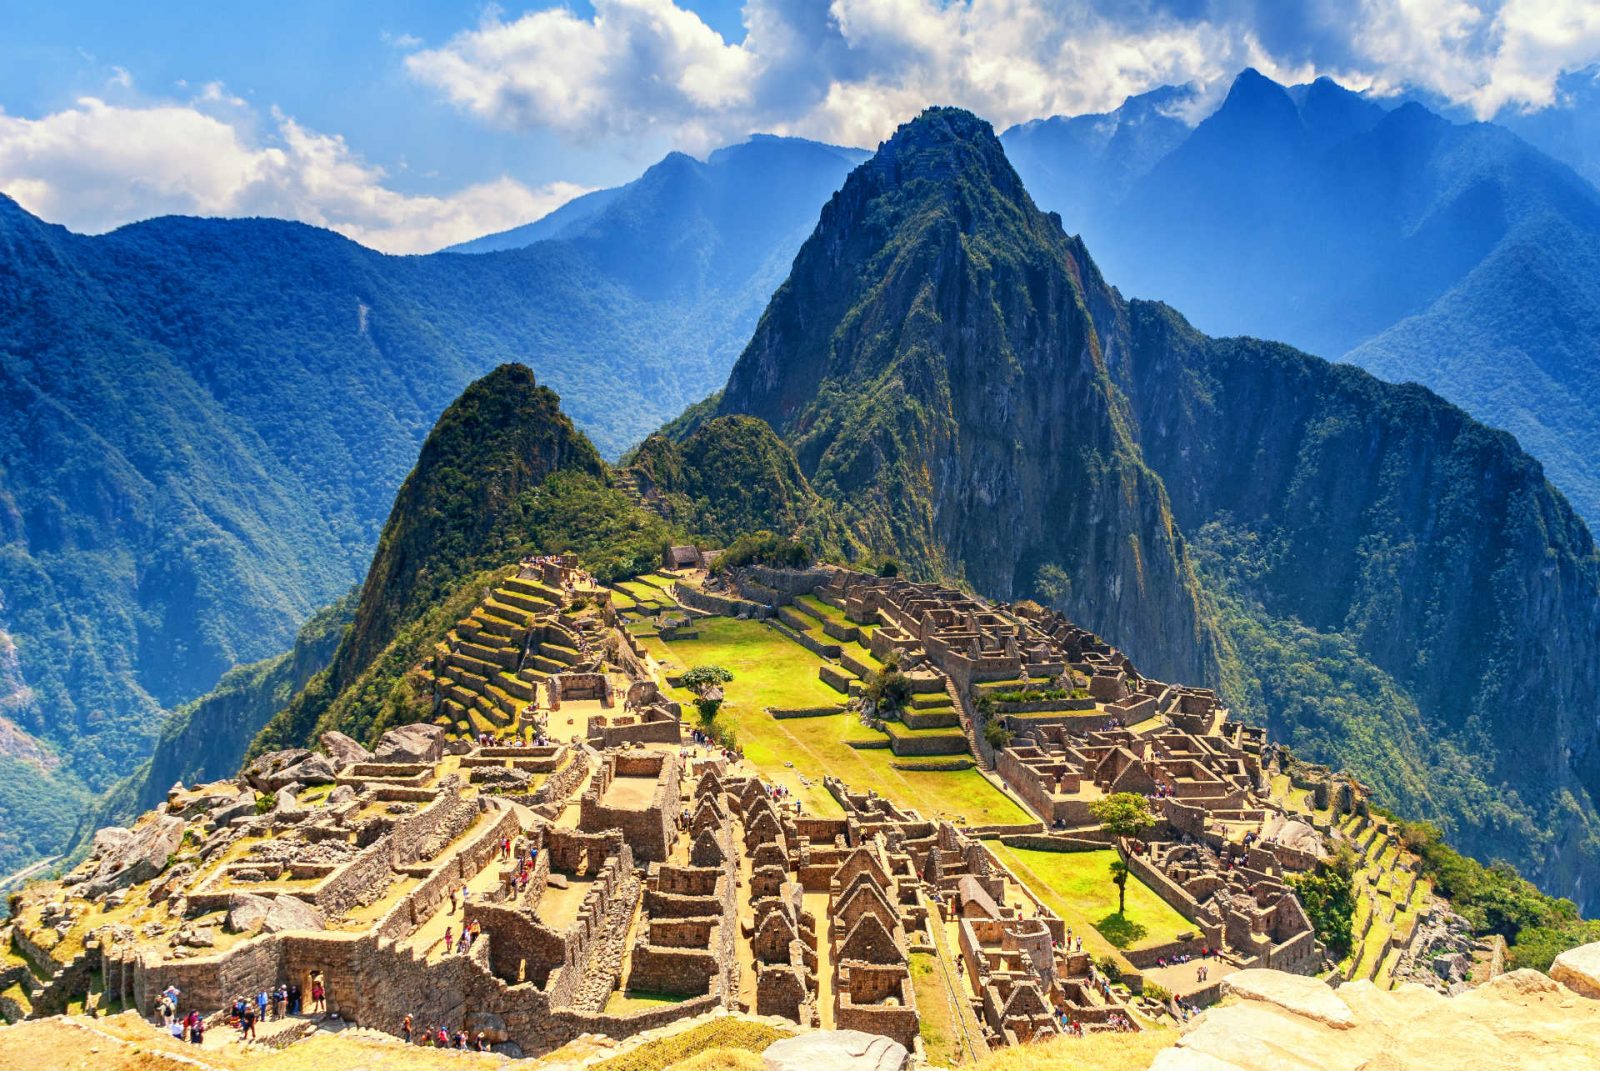 These Brainteasers About South American Countries Will Stump Most Geography Experts Machu Picchu, Inca Empire civilization, Peru